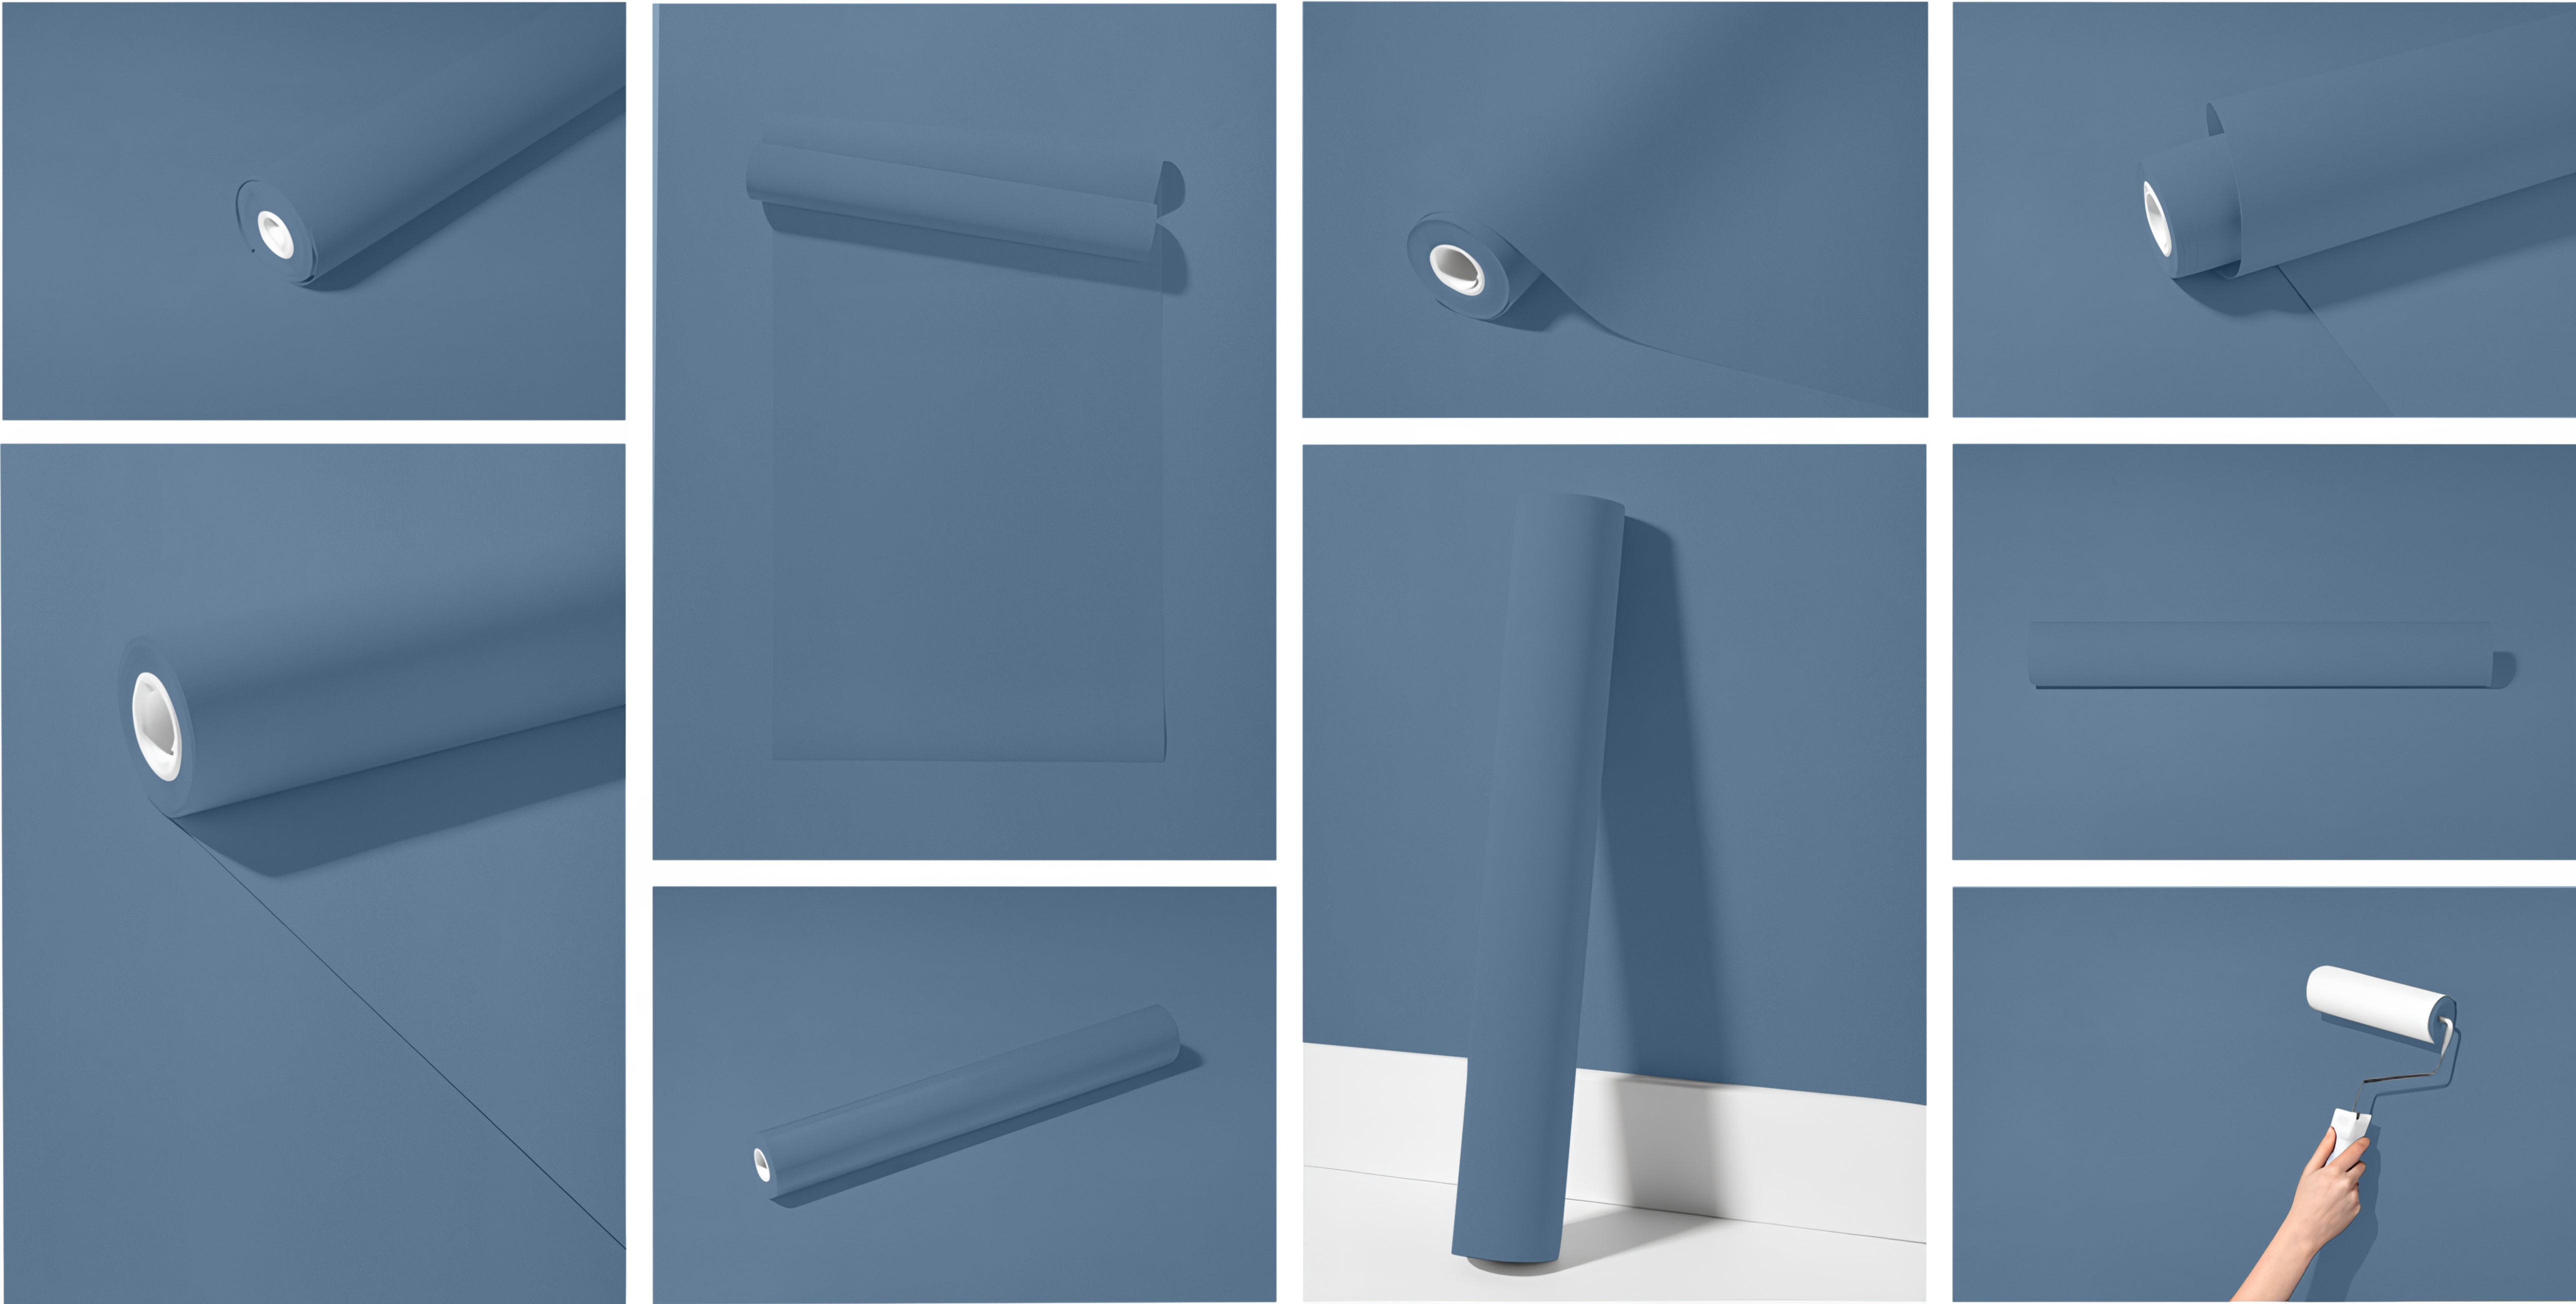 Peel & Stick Removable Re-usable Paint - Color RAL 5014 Pigeon Blue - offRAL™ - RALRAW LLC, USA